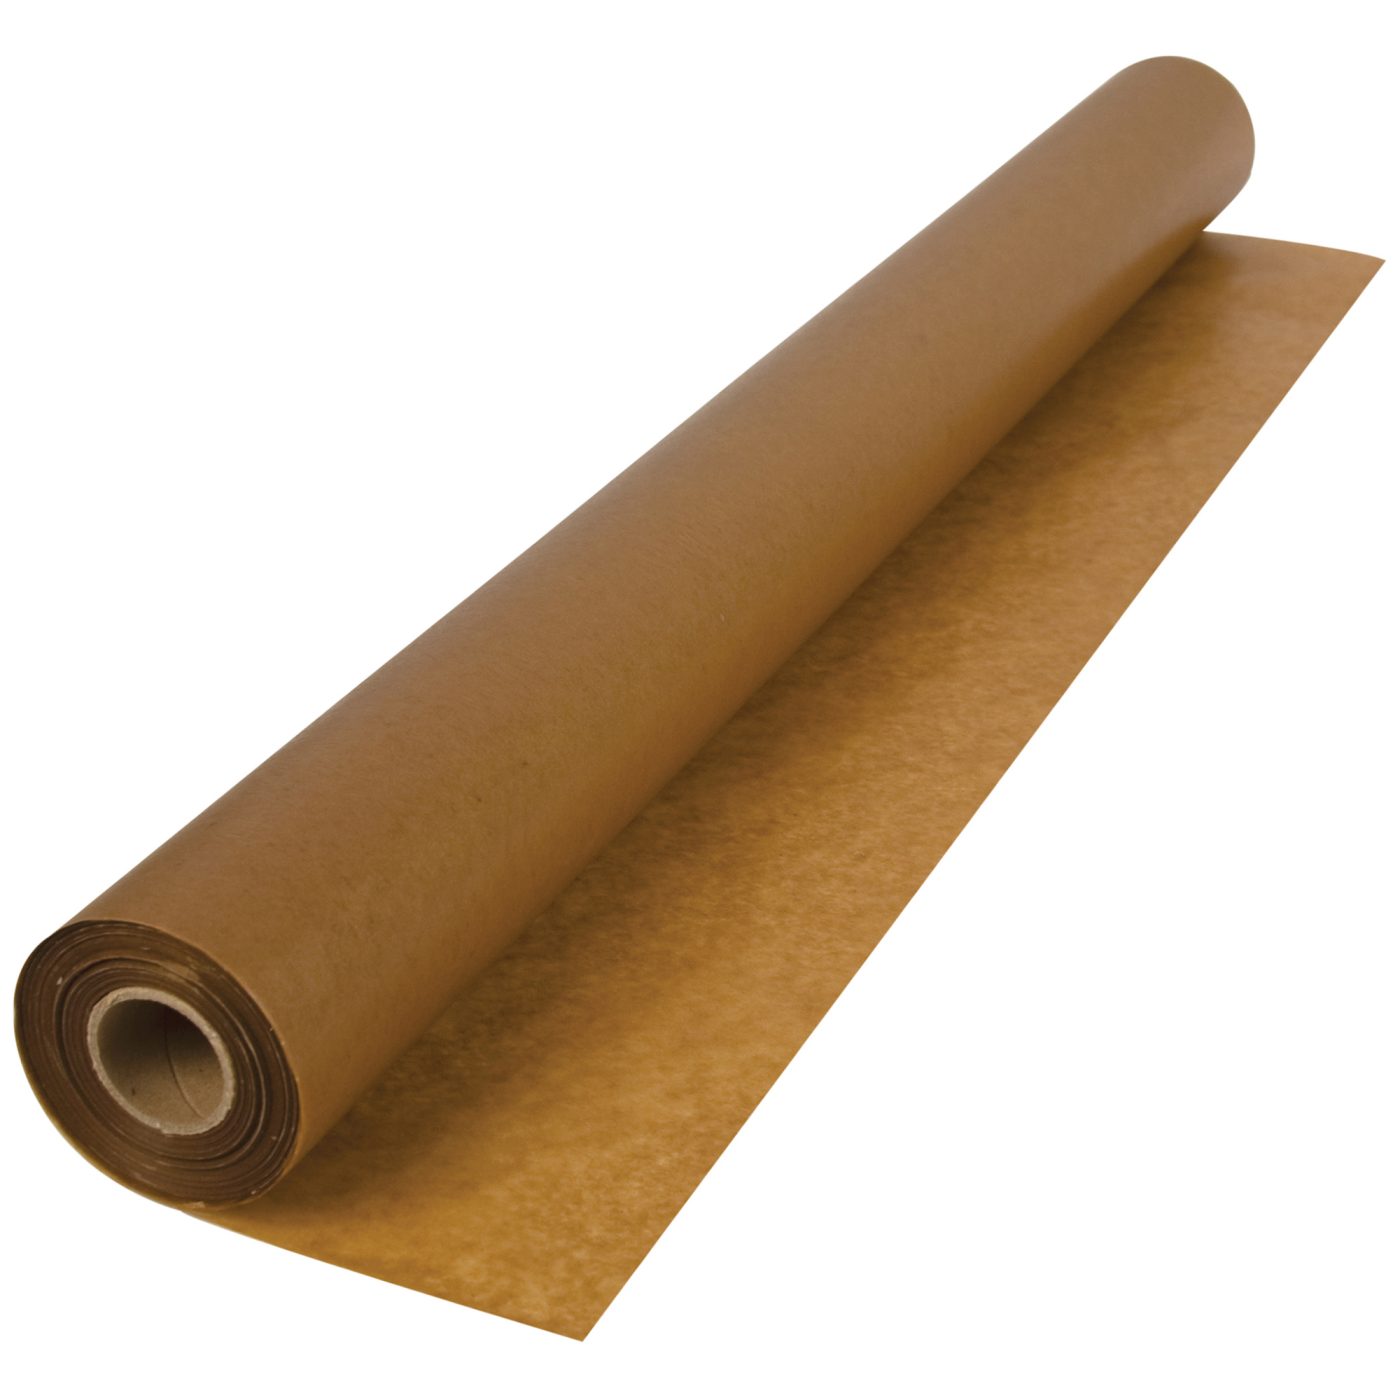 WAXED PAPER ROLL UNDERLAYMENT